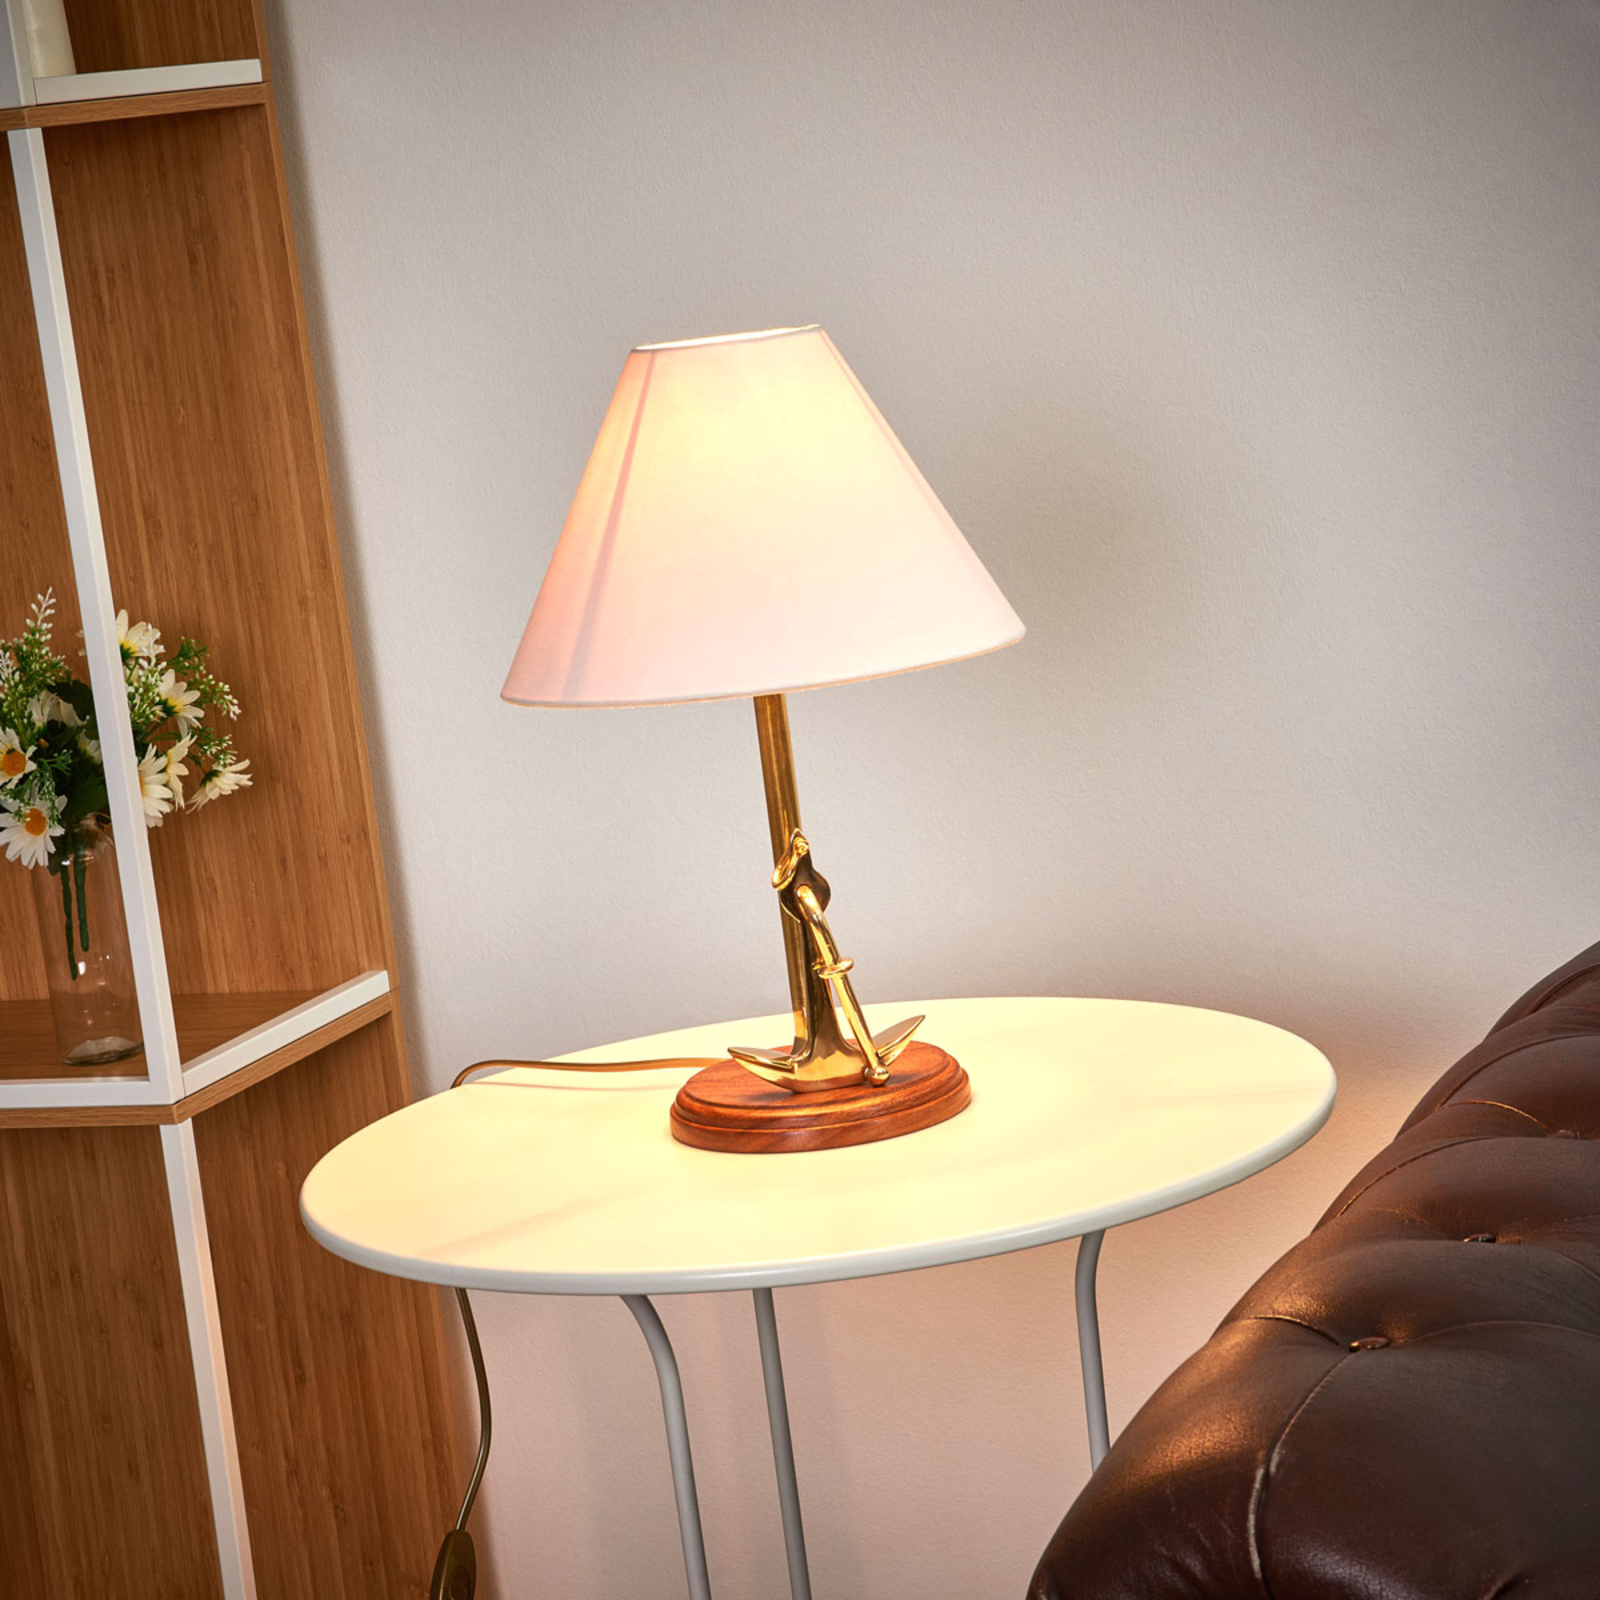 Anchor table lamp with nautical detail